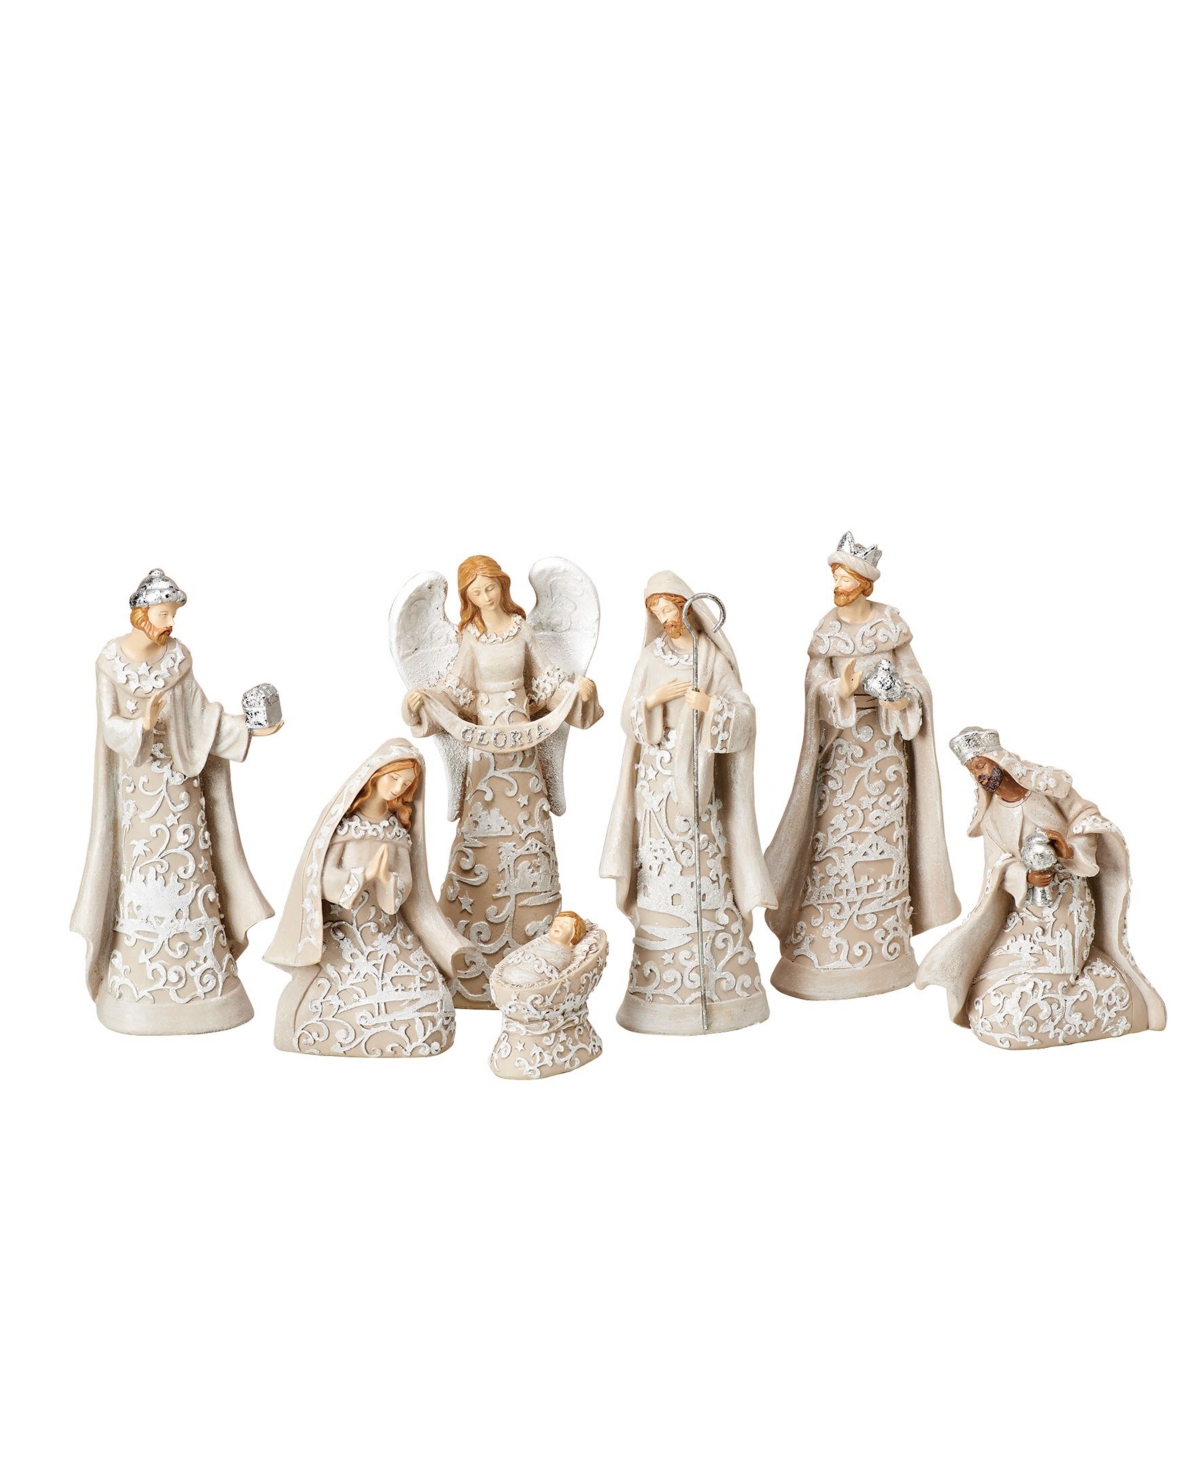 7.5" H 7 Piece Set Nativity with Angel - Multi Color